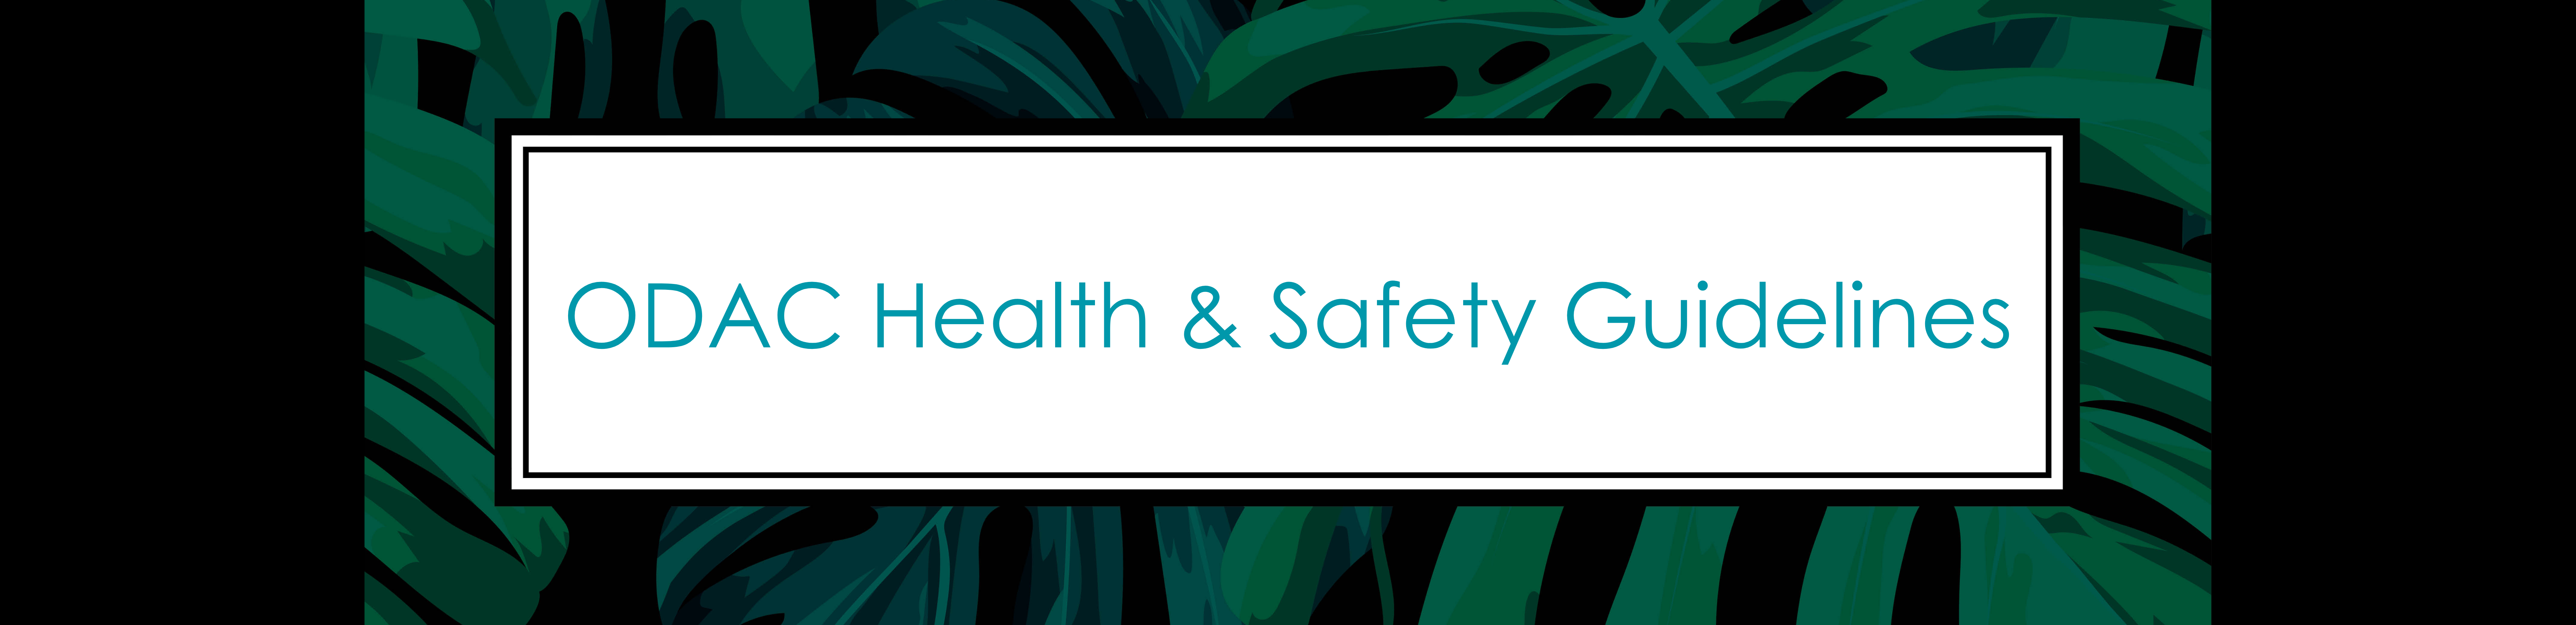 ODAC Health & Safety Guidelines